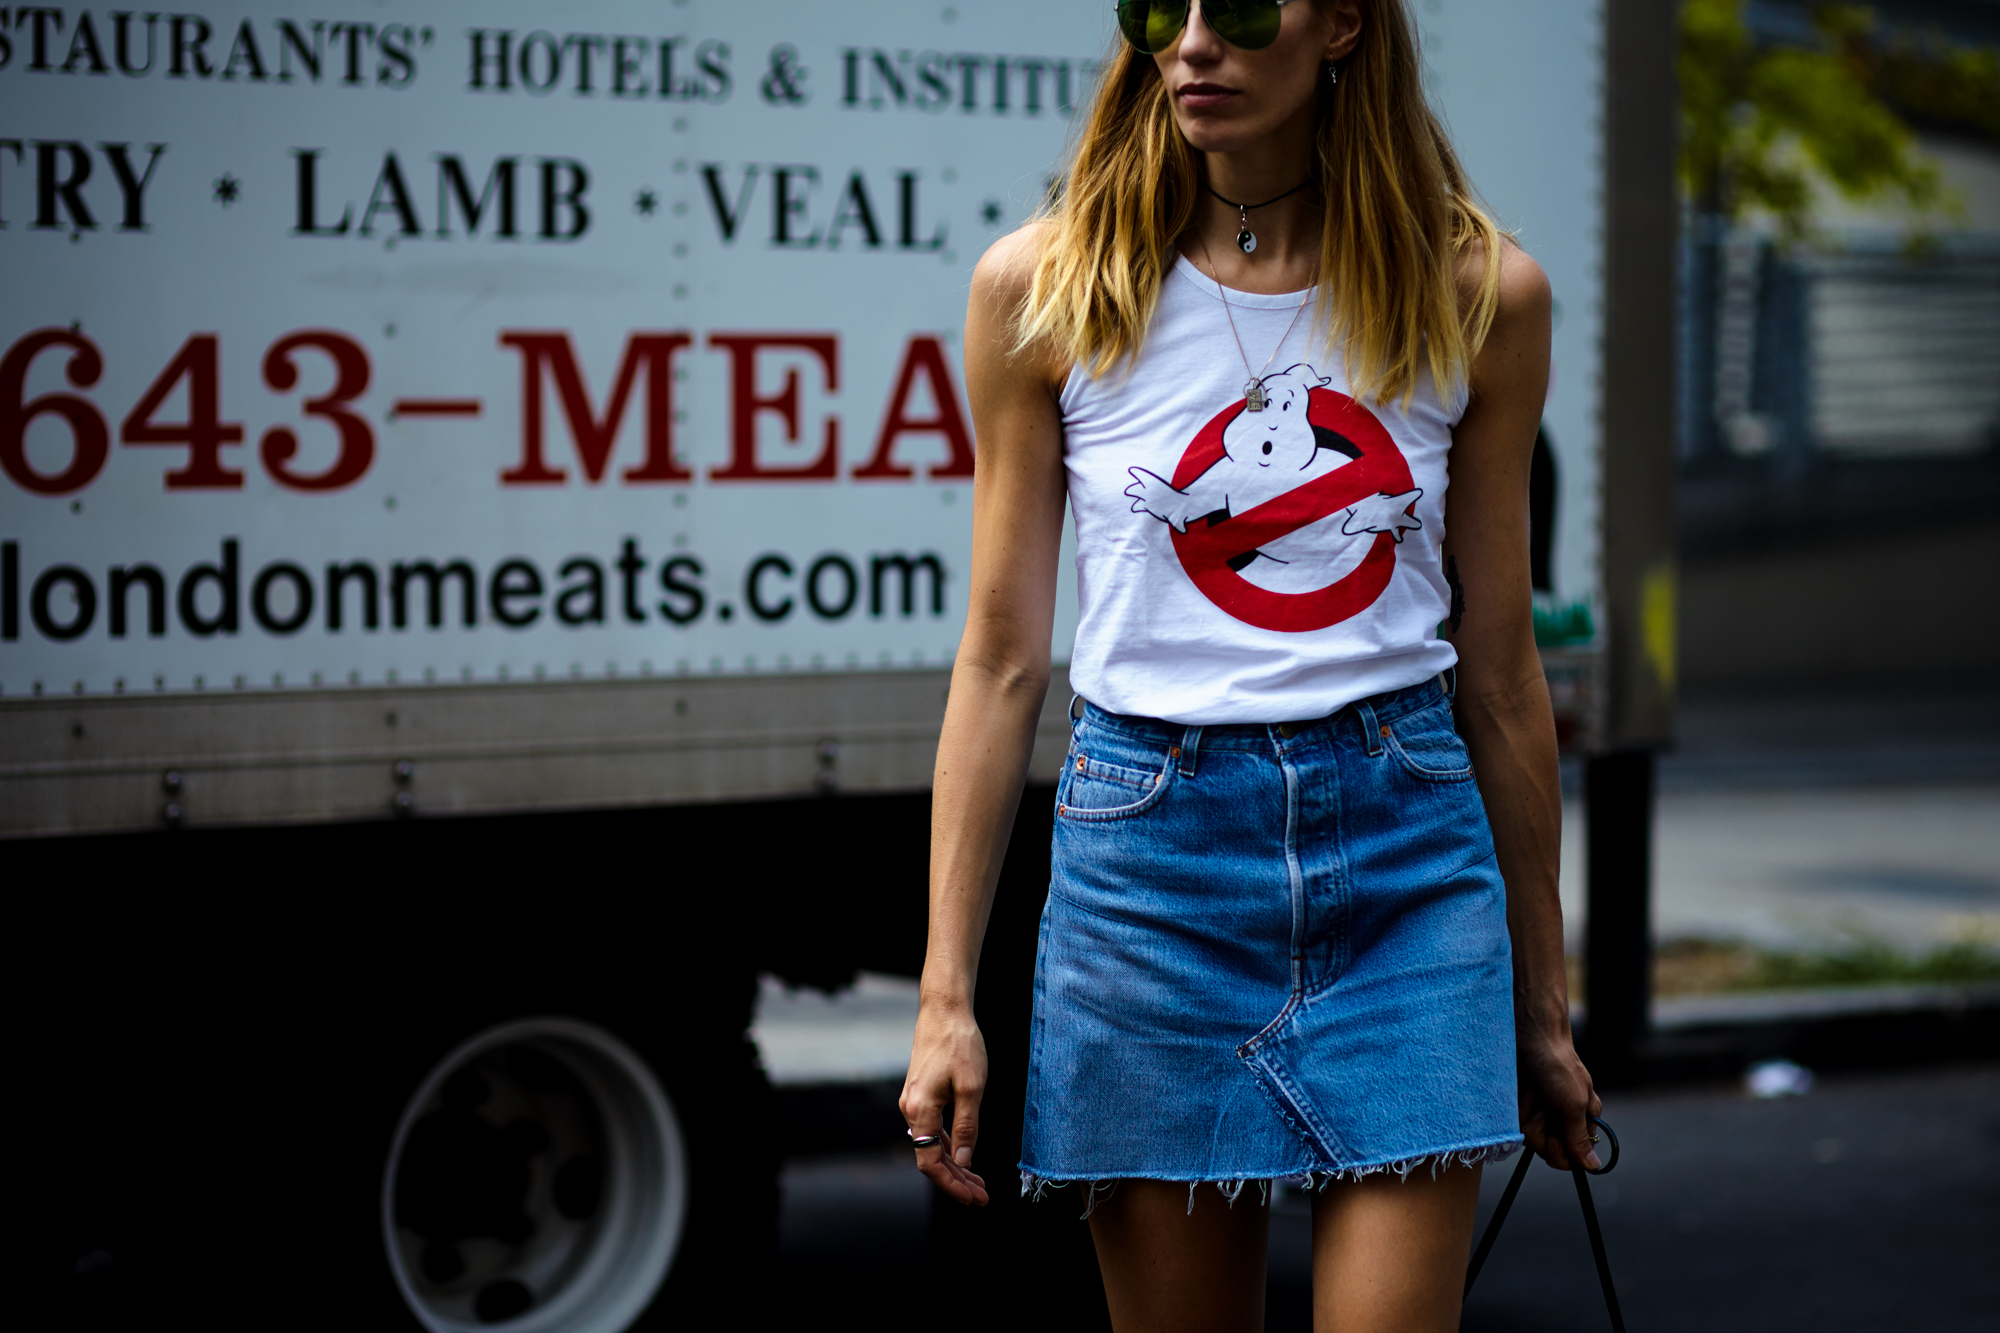 NYFW Spring-Summer 2017 Streetstyle: Fashion Stylist Veronika Helbrunner wearing a white top and denim mini skirt after a show in New York City